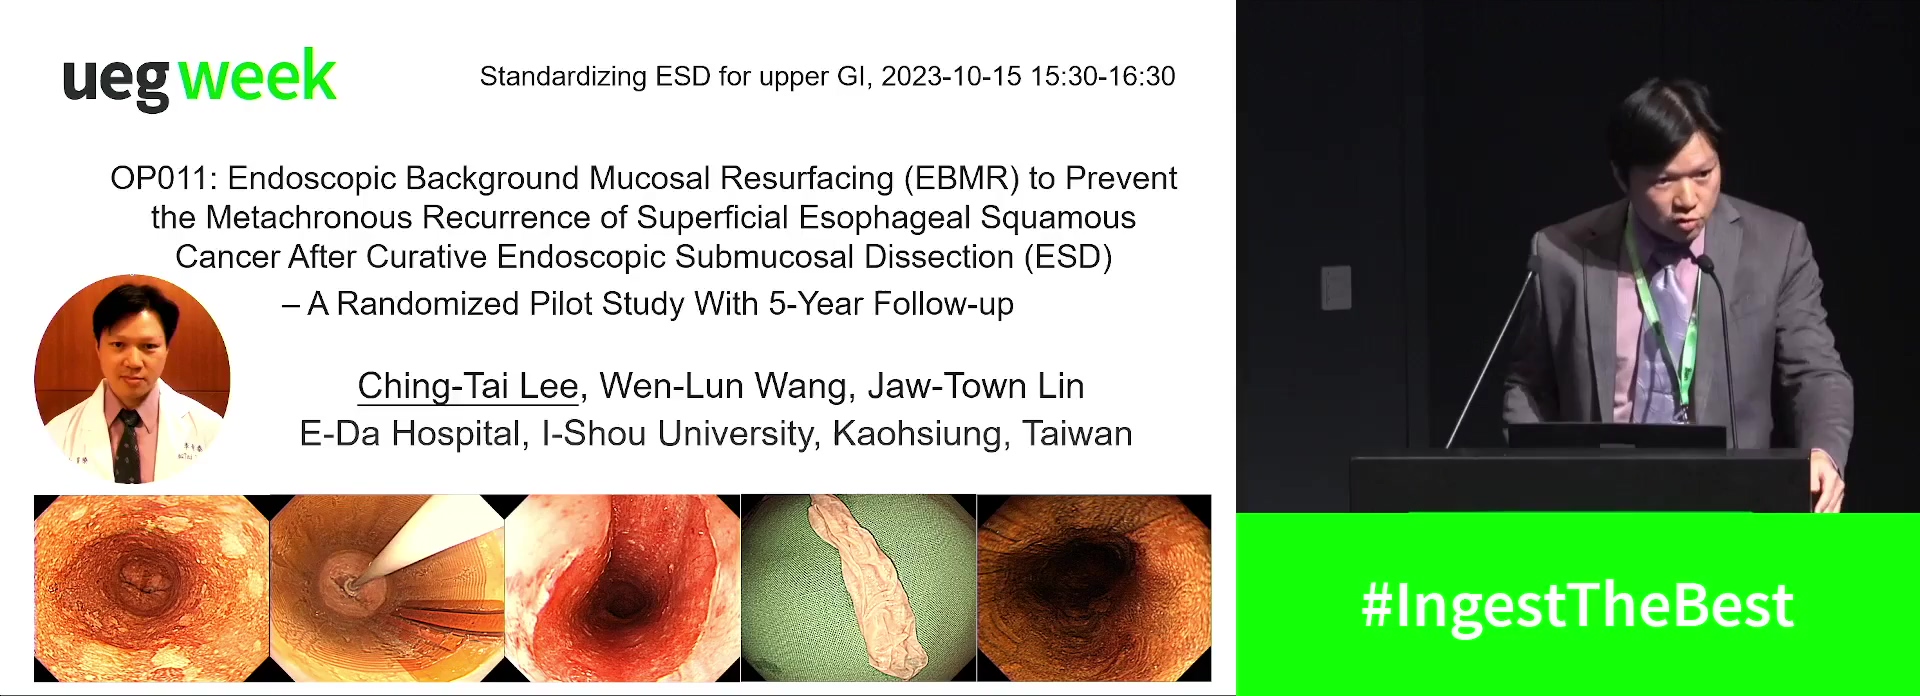 ENDOSCOPIC BACKGROUND MUCOSAL RESURFACING (EBMR) TO PREVENT THE METACHRONOUS RECURRENCE OF SUPERFICIAL ESOPHAGEAL SQUAMOUS CANCER AFTER CURATIVE ENDOSCOPIC SUBMUCOSAL DISSECTION- A RANDOMIZED PILOT STUDY WITH 5-YEAR FOLLOW-UP